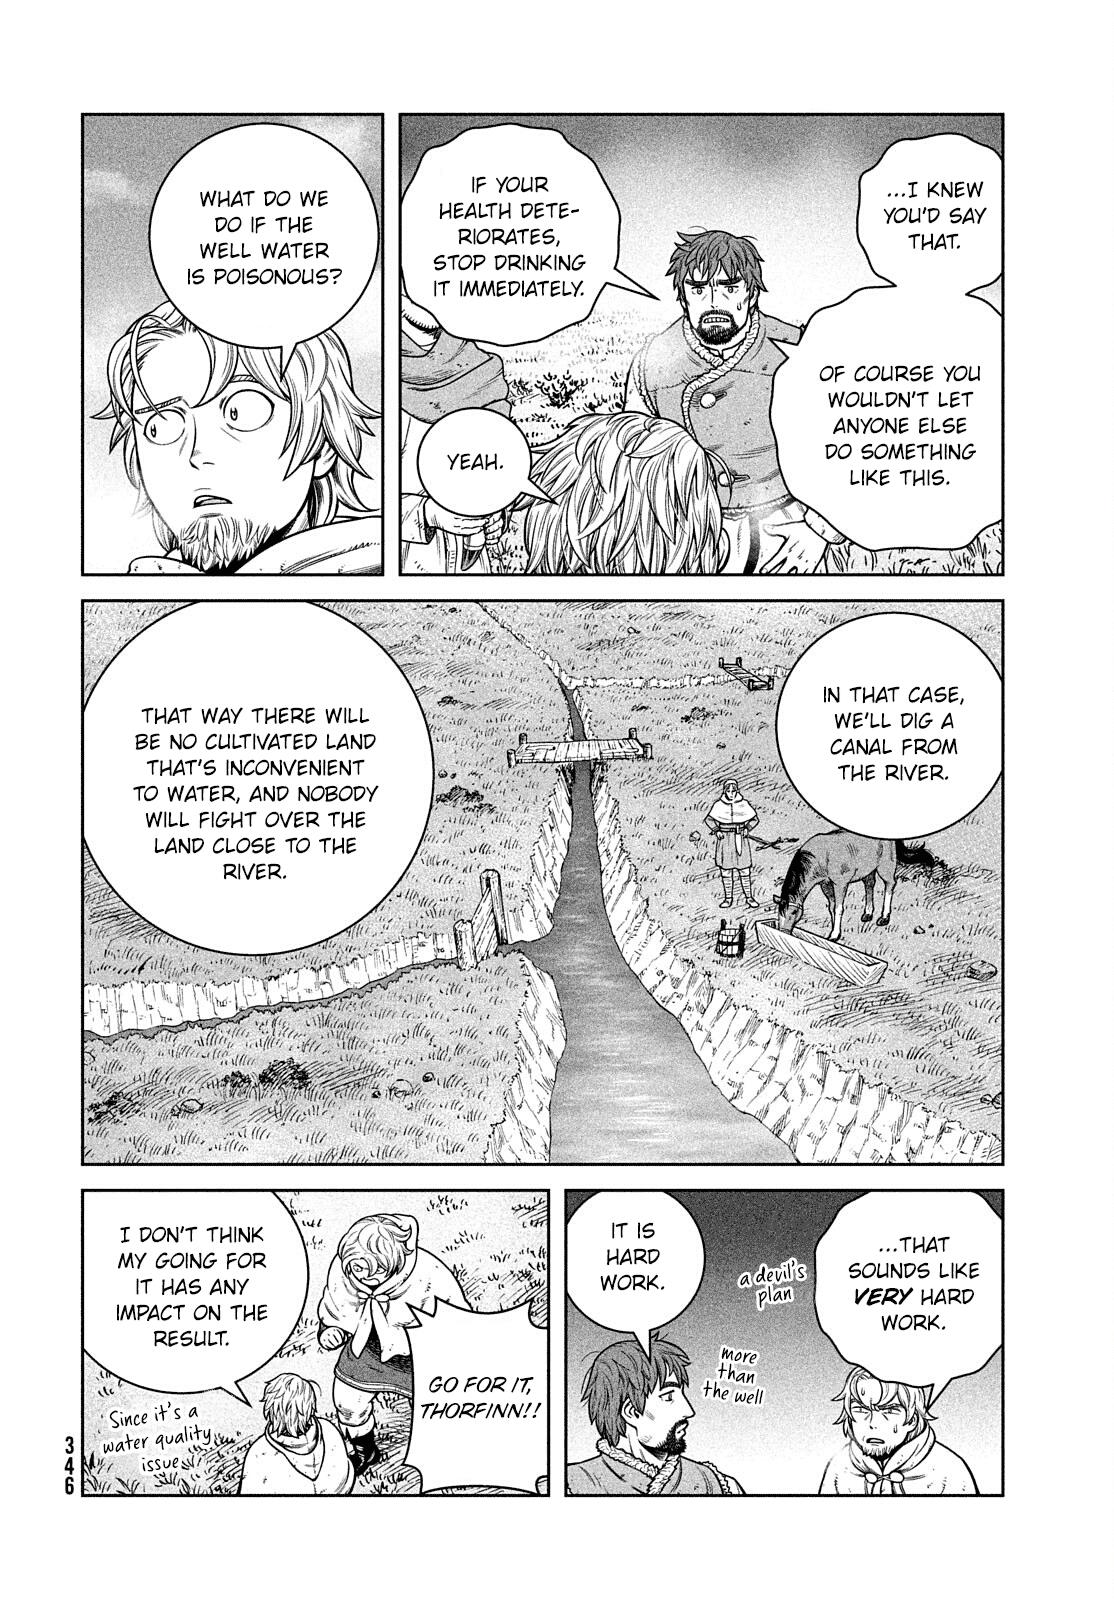 vinland saga 187, vinland saga 187, Read vinland saga 187, vinland saga 187 Manga, vinland saga 187 english, vinland saga 187 raw manga, vinland saga 187 online, vinland saga 187 high quality, vinland saga 187 chapter, vinland saga 187 manga scan